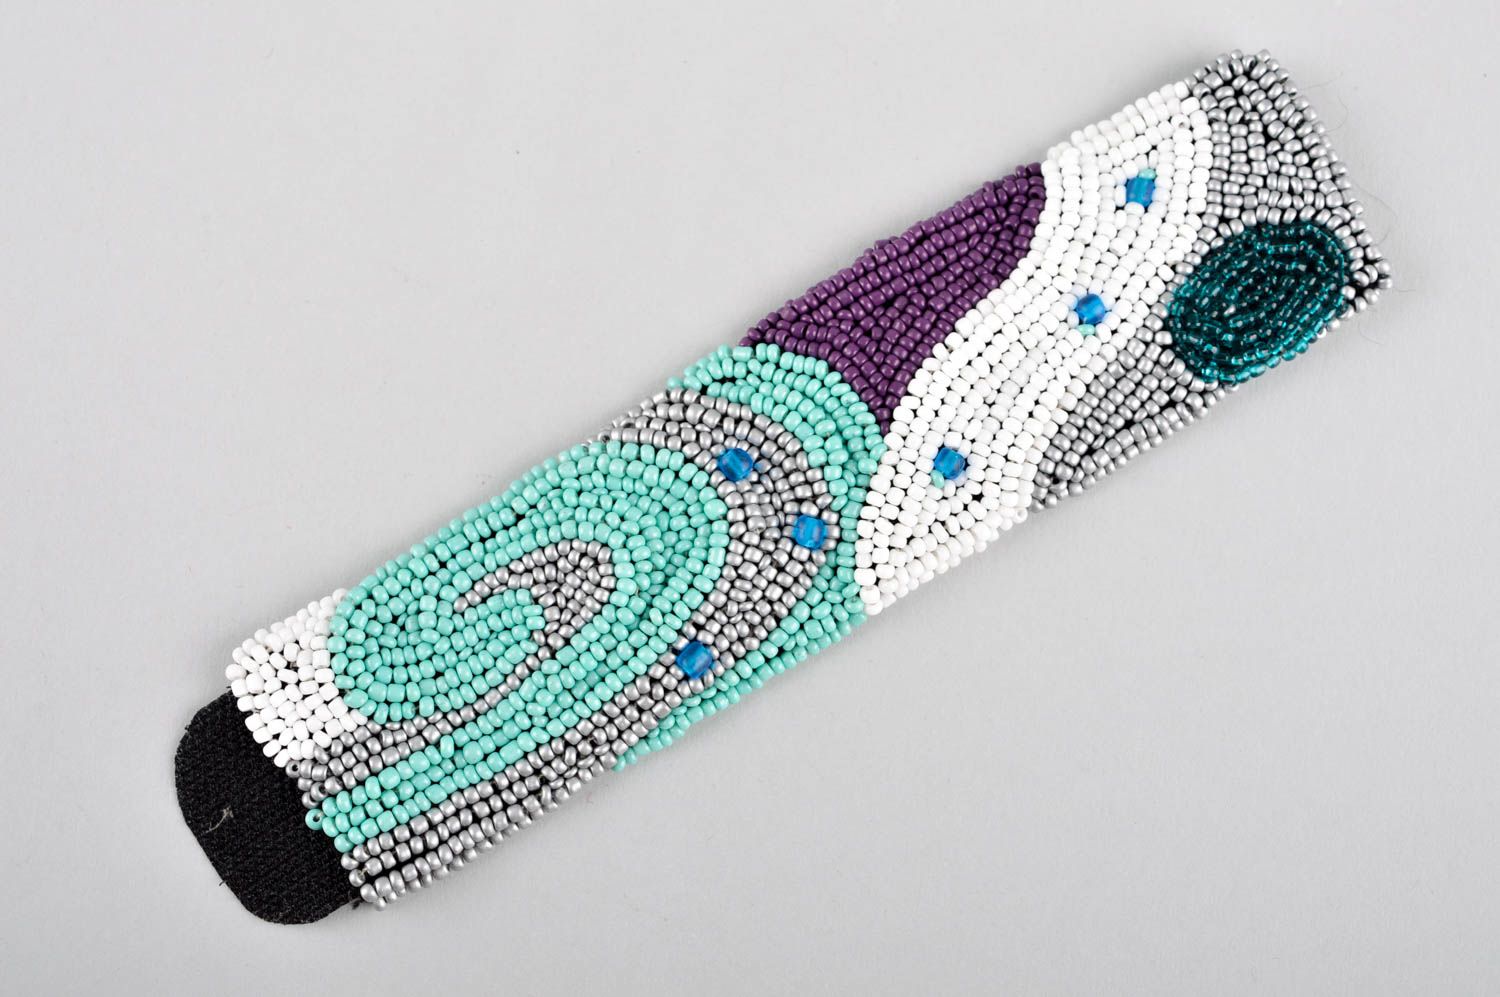 Stylish handmade beaded wide wrist bracelet in turquoise, white and black colors photo 5